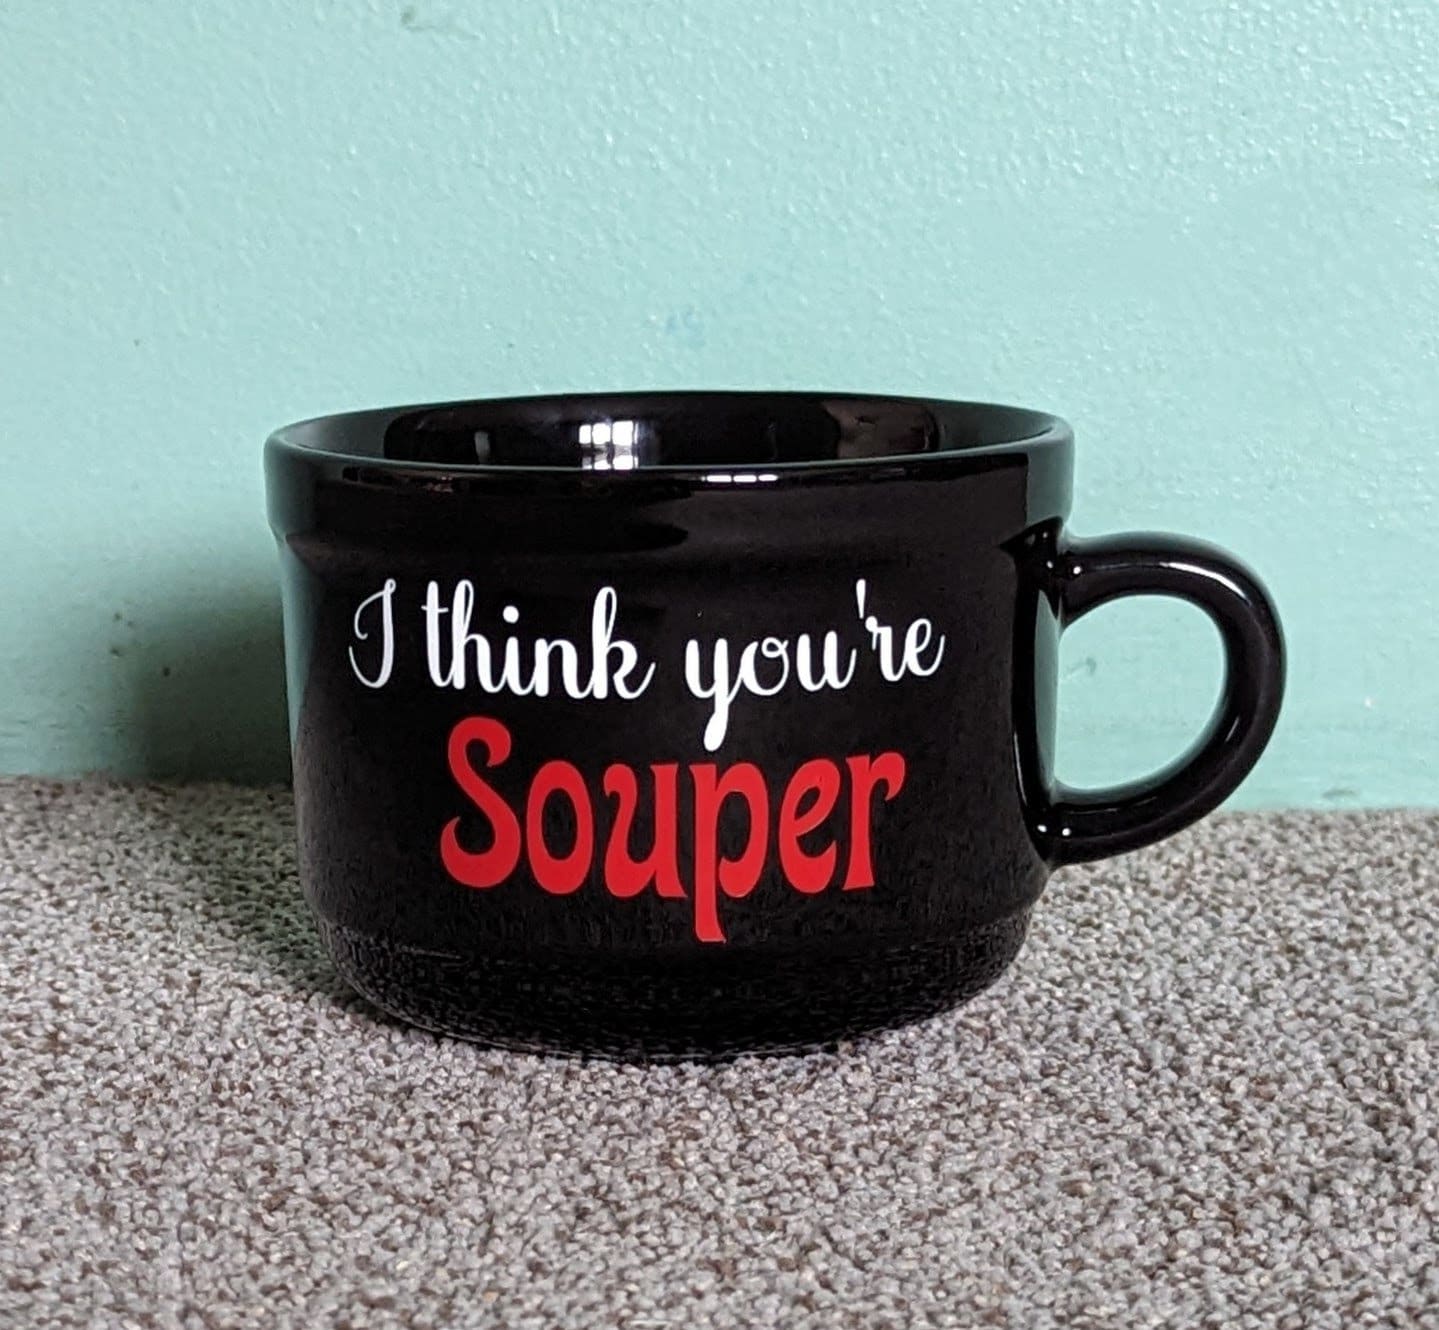 Soup Gifts, Gifts For Soup Lovers, Food Gifts, Foodie Gifts, Gifts For  Cooks, Chefs Presents, Soup Theme, Soup Mug, Funny Mug, Novelty Mug